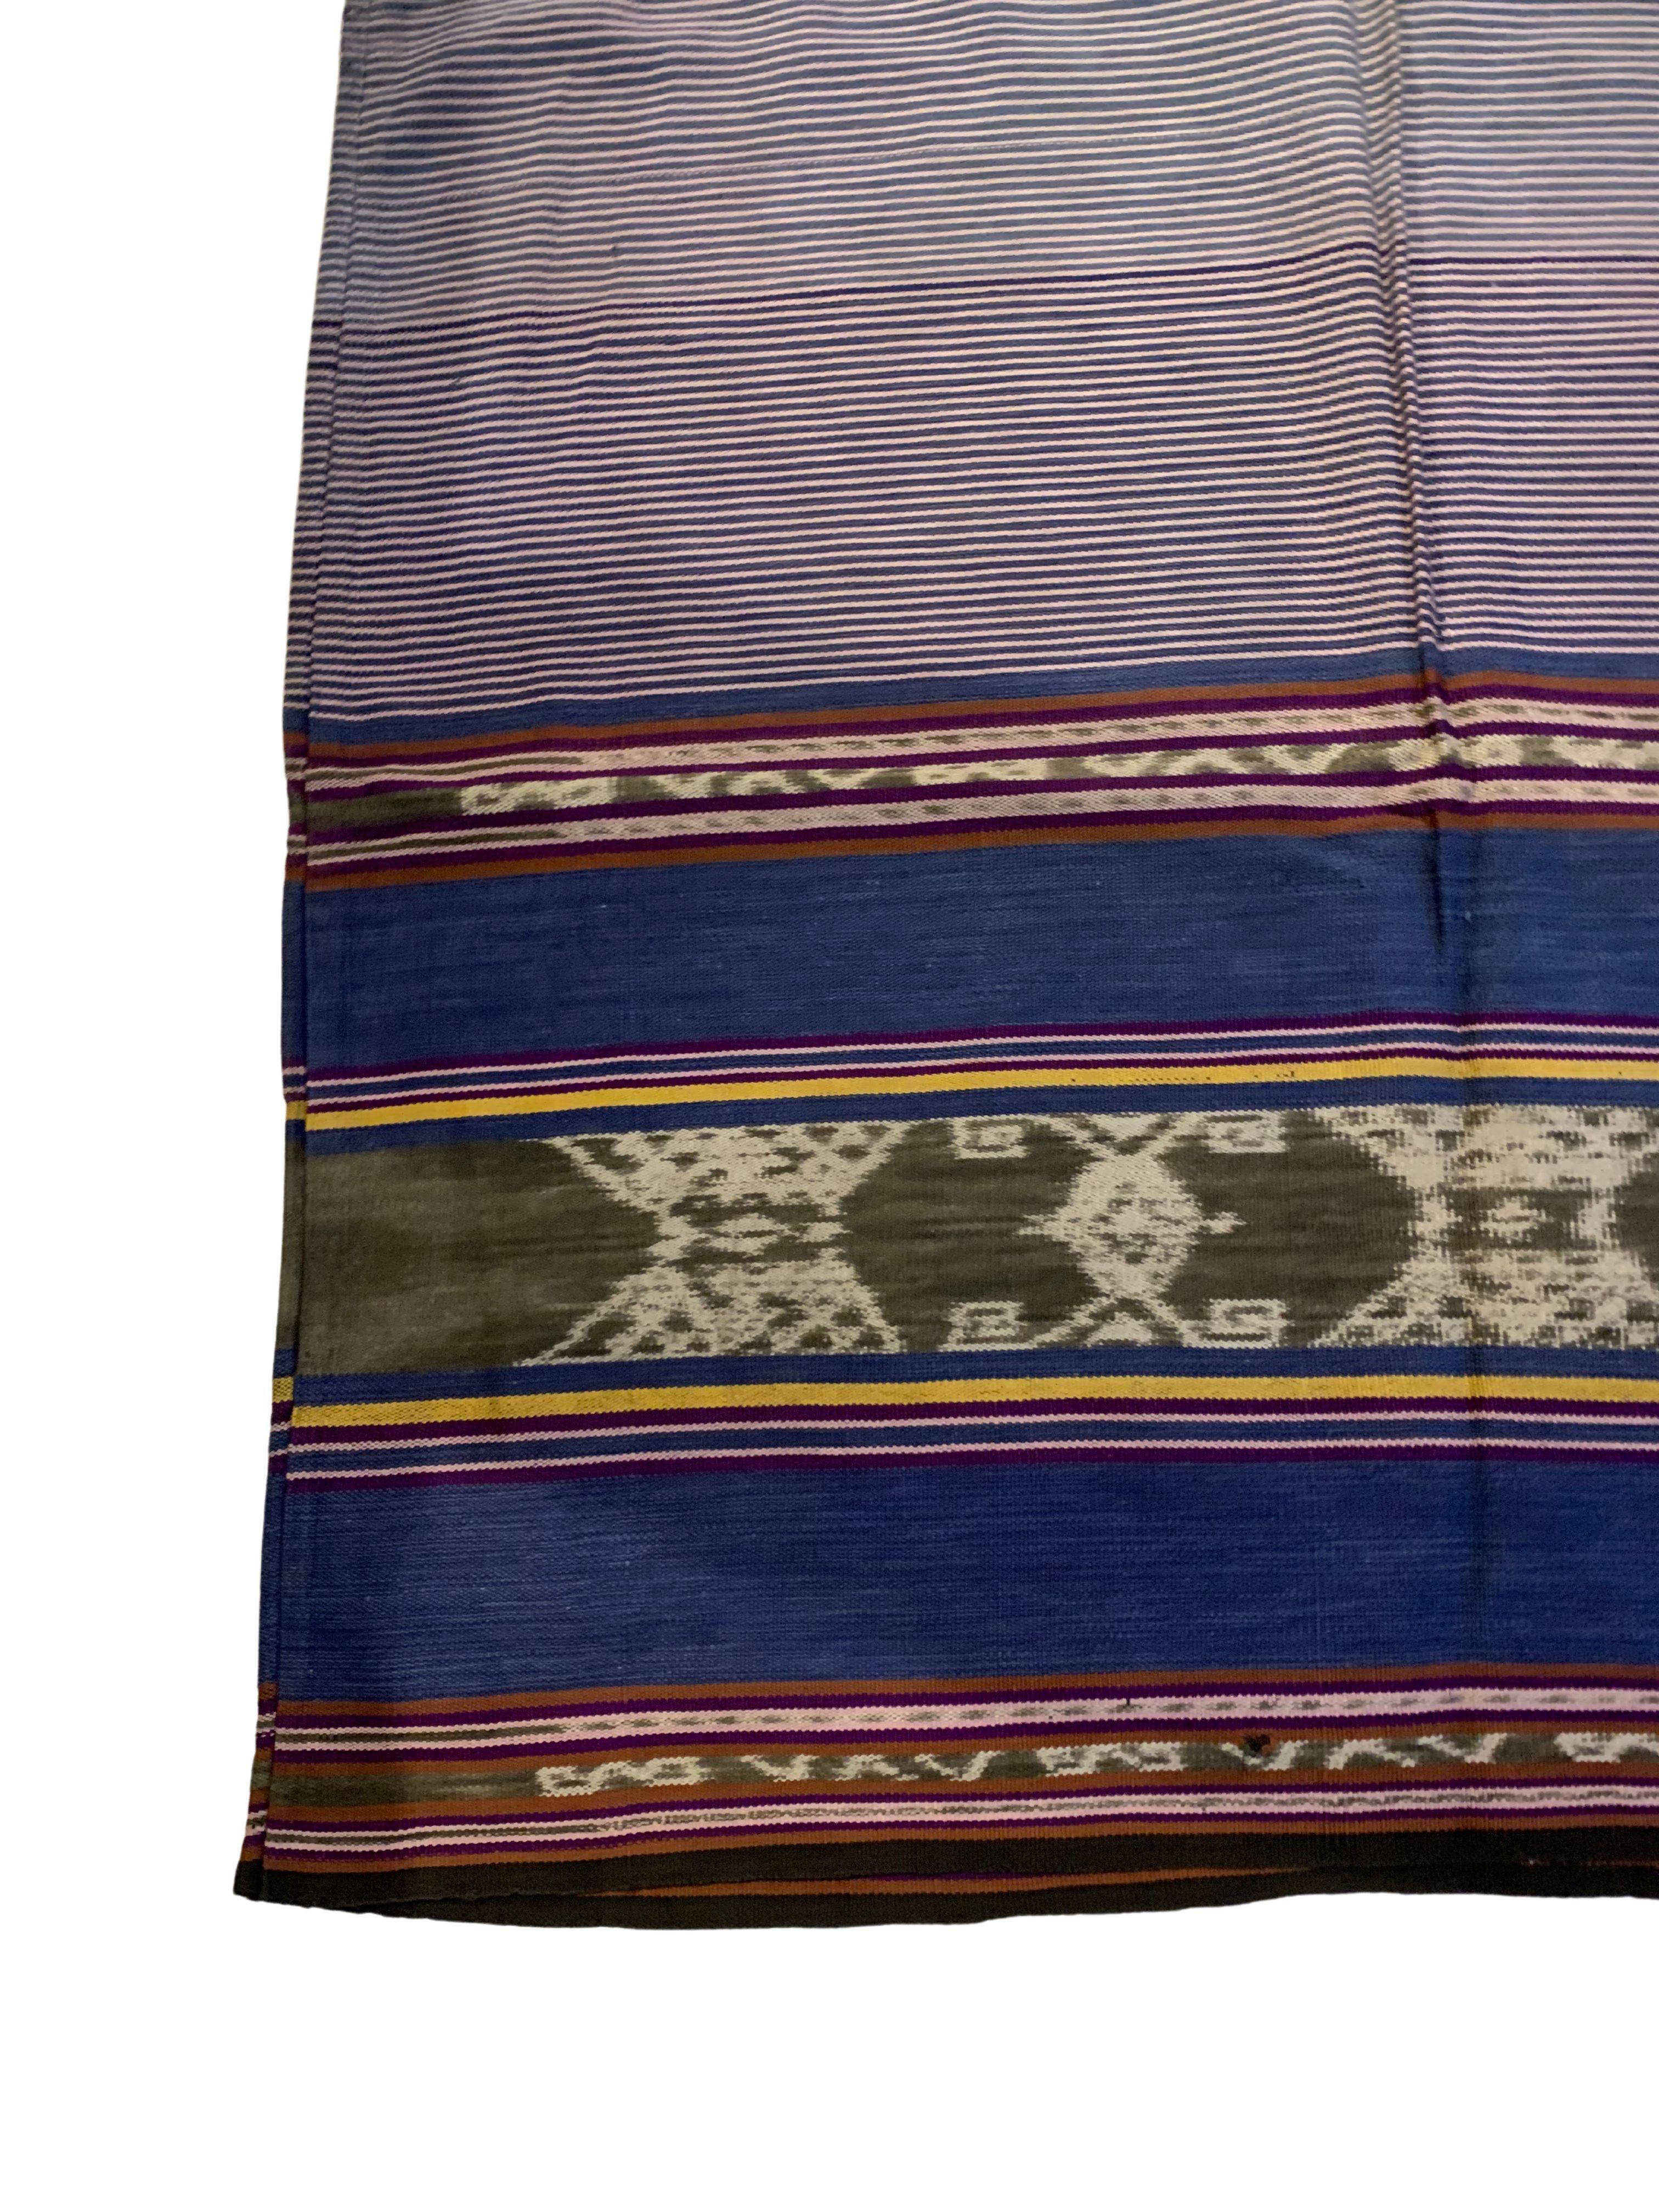 This Ikat textile originates from the Island of Timor, Indonesia. It is hand-woven using naturally dyed yarns via a method passed on through generations. This textile is know as a 